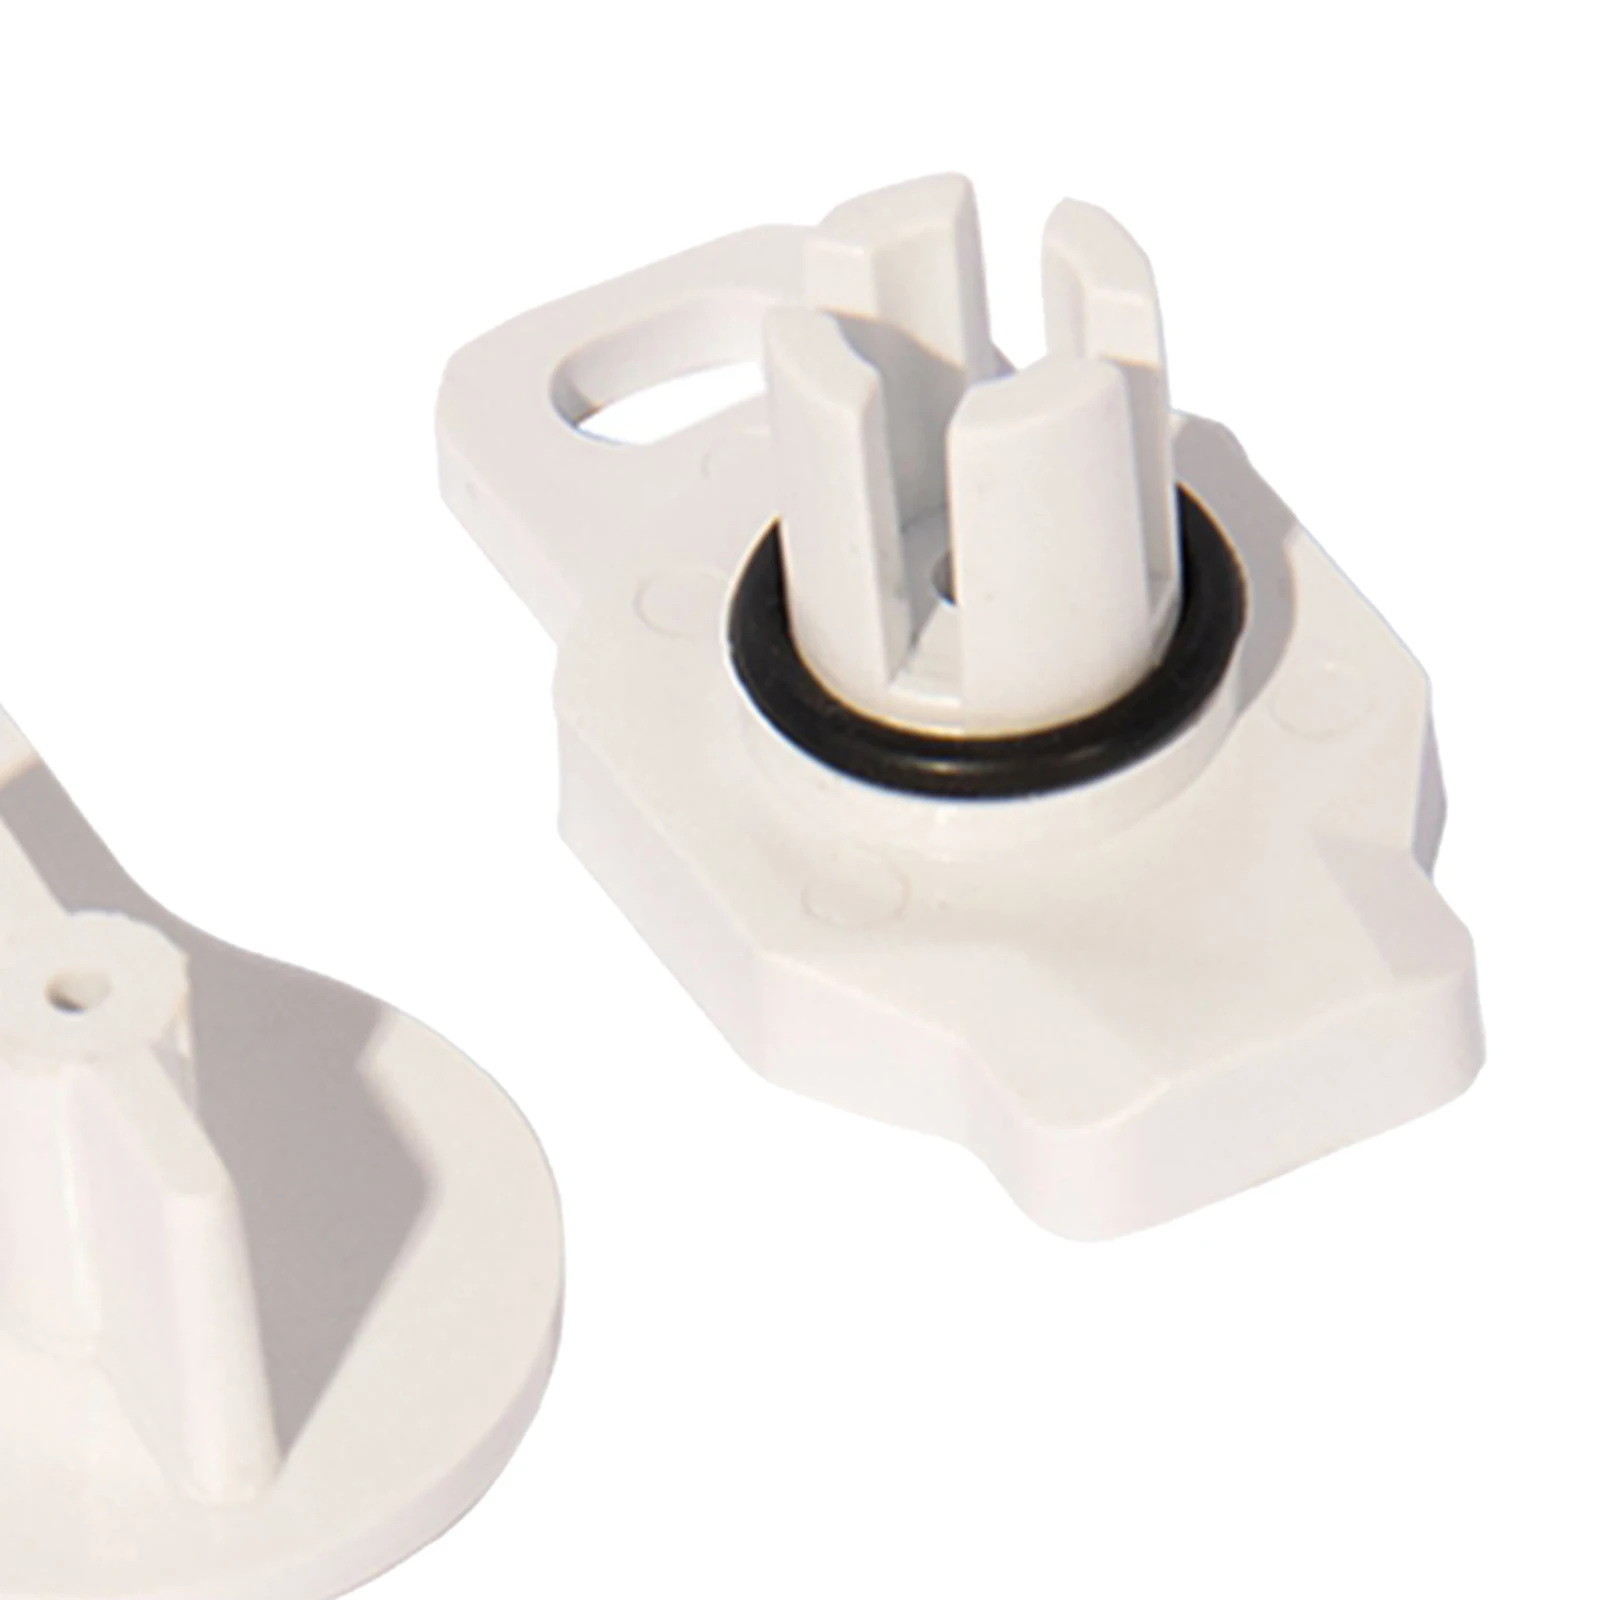 Latch for Marine Engine Room, Manhole Cover, Hatch Cover, Deck Cover, Access Cover, White Boat Accessories, ABS Plastic